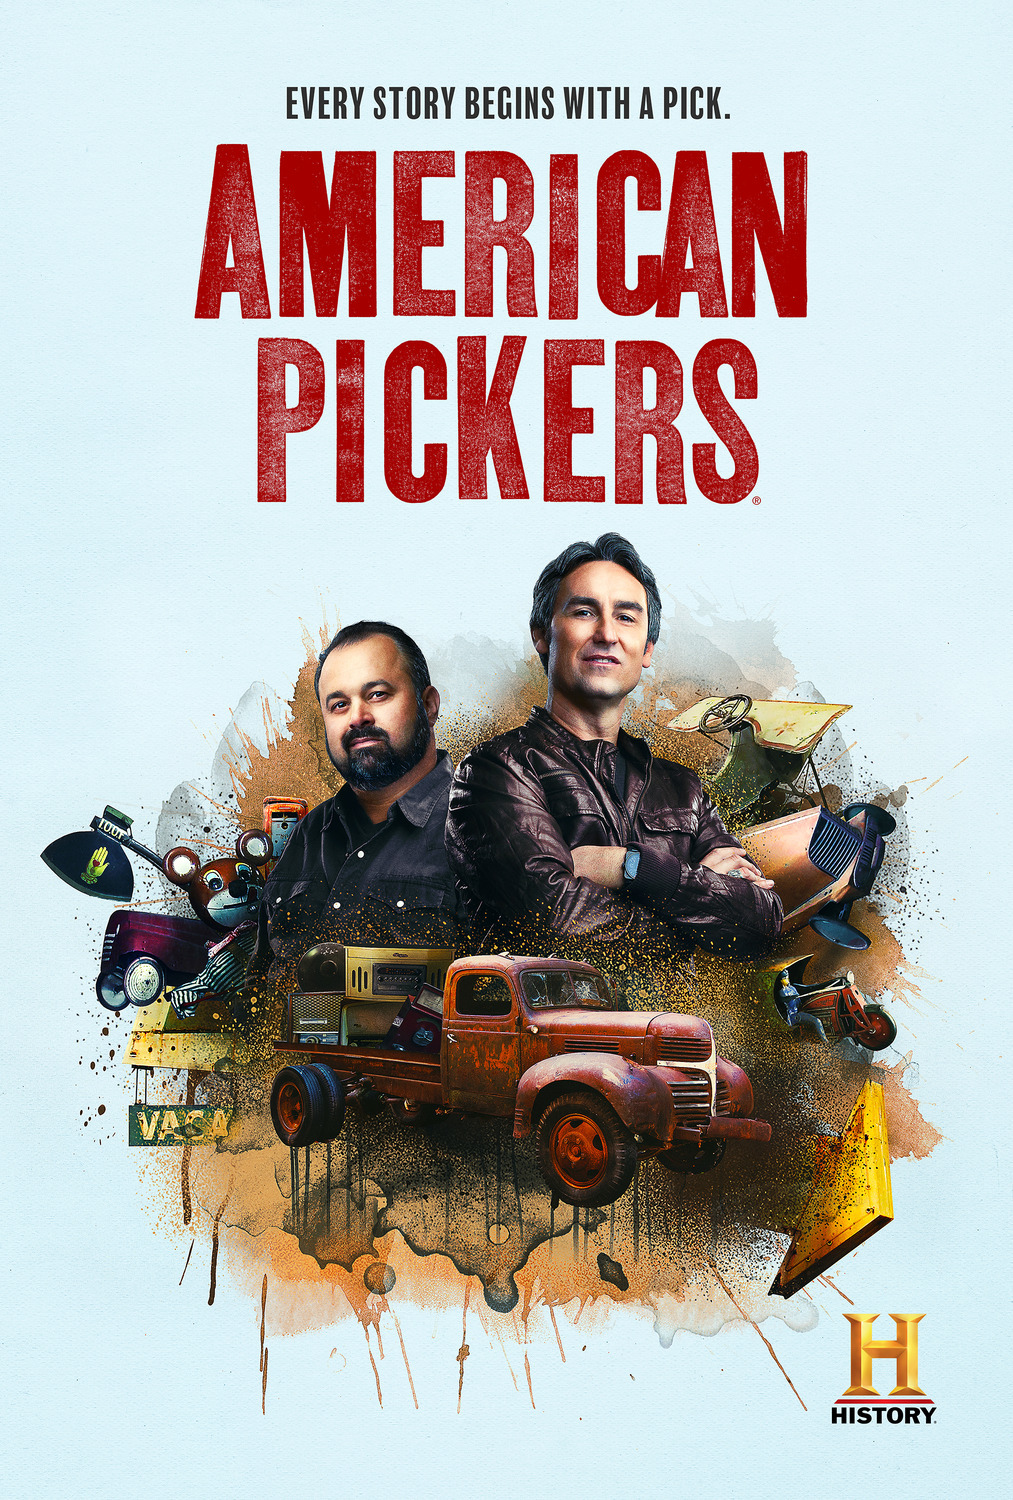 Pickers